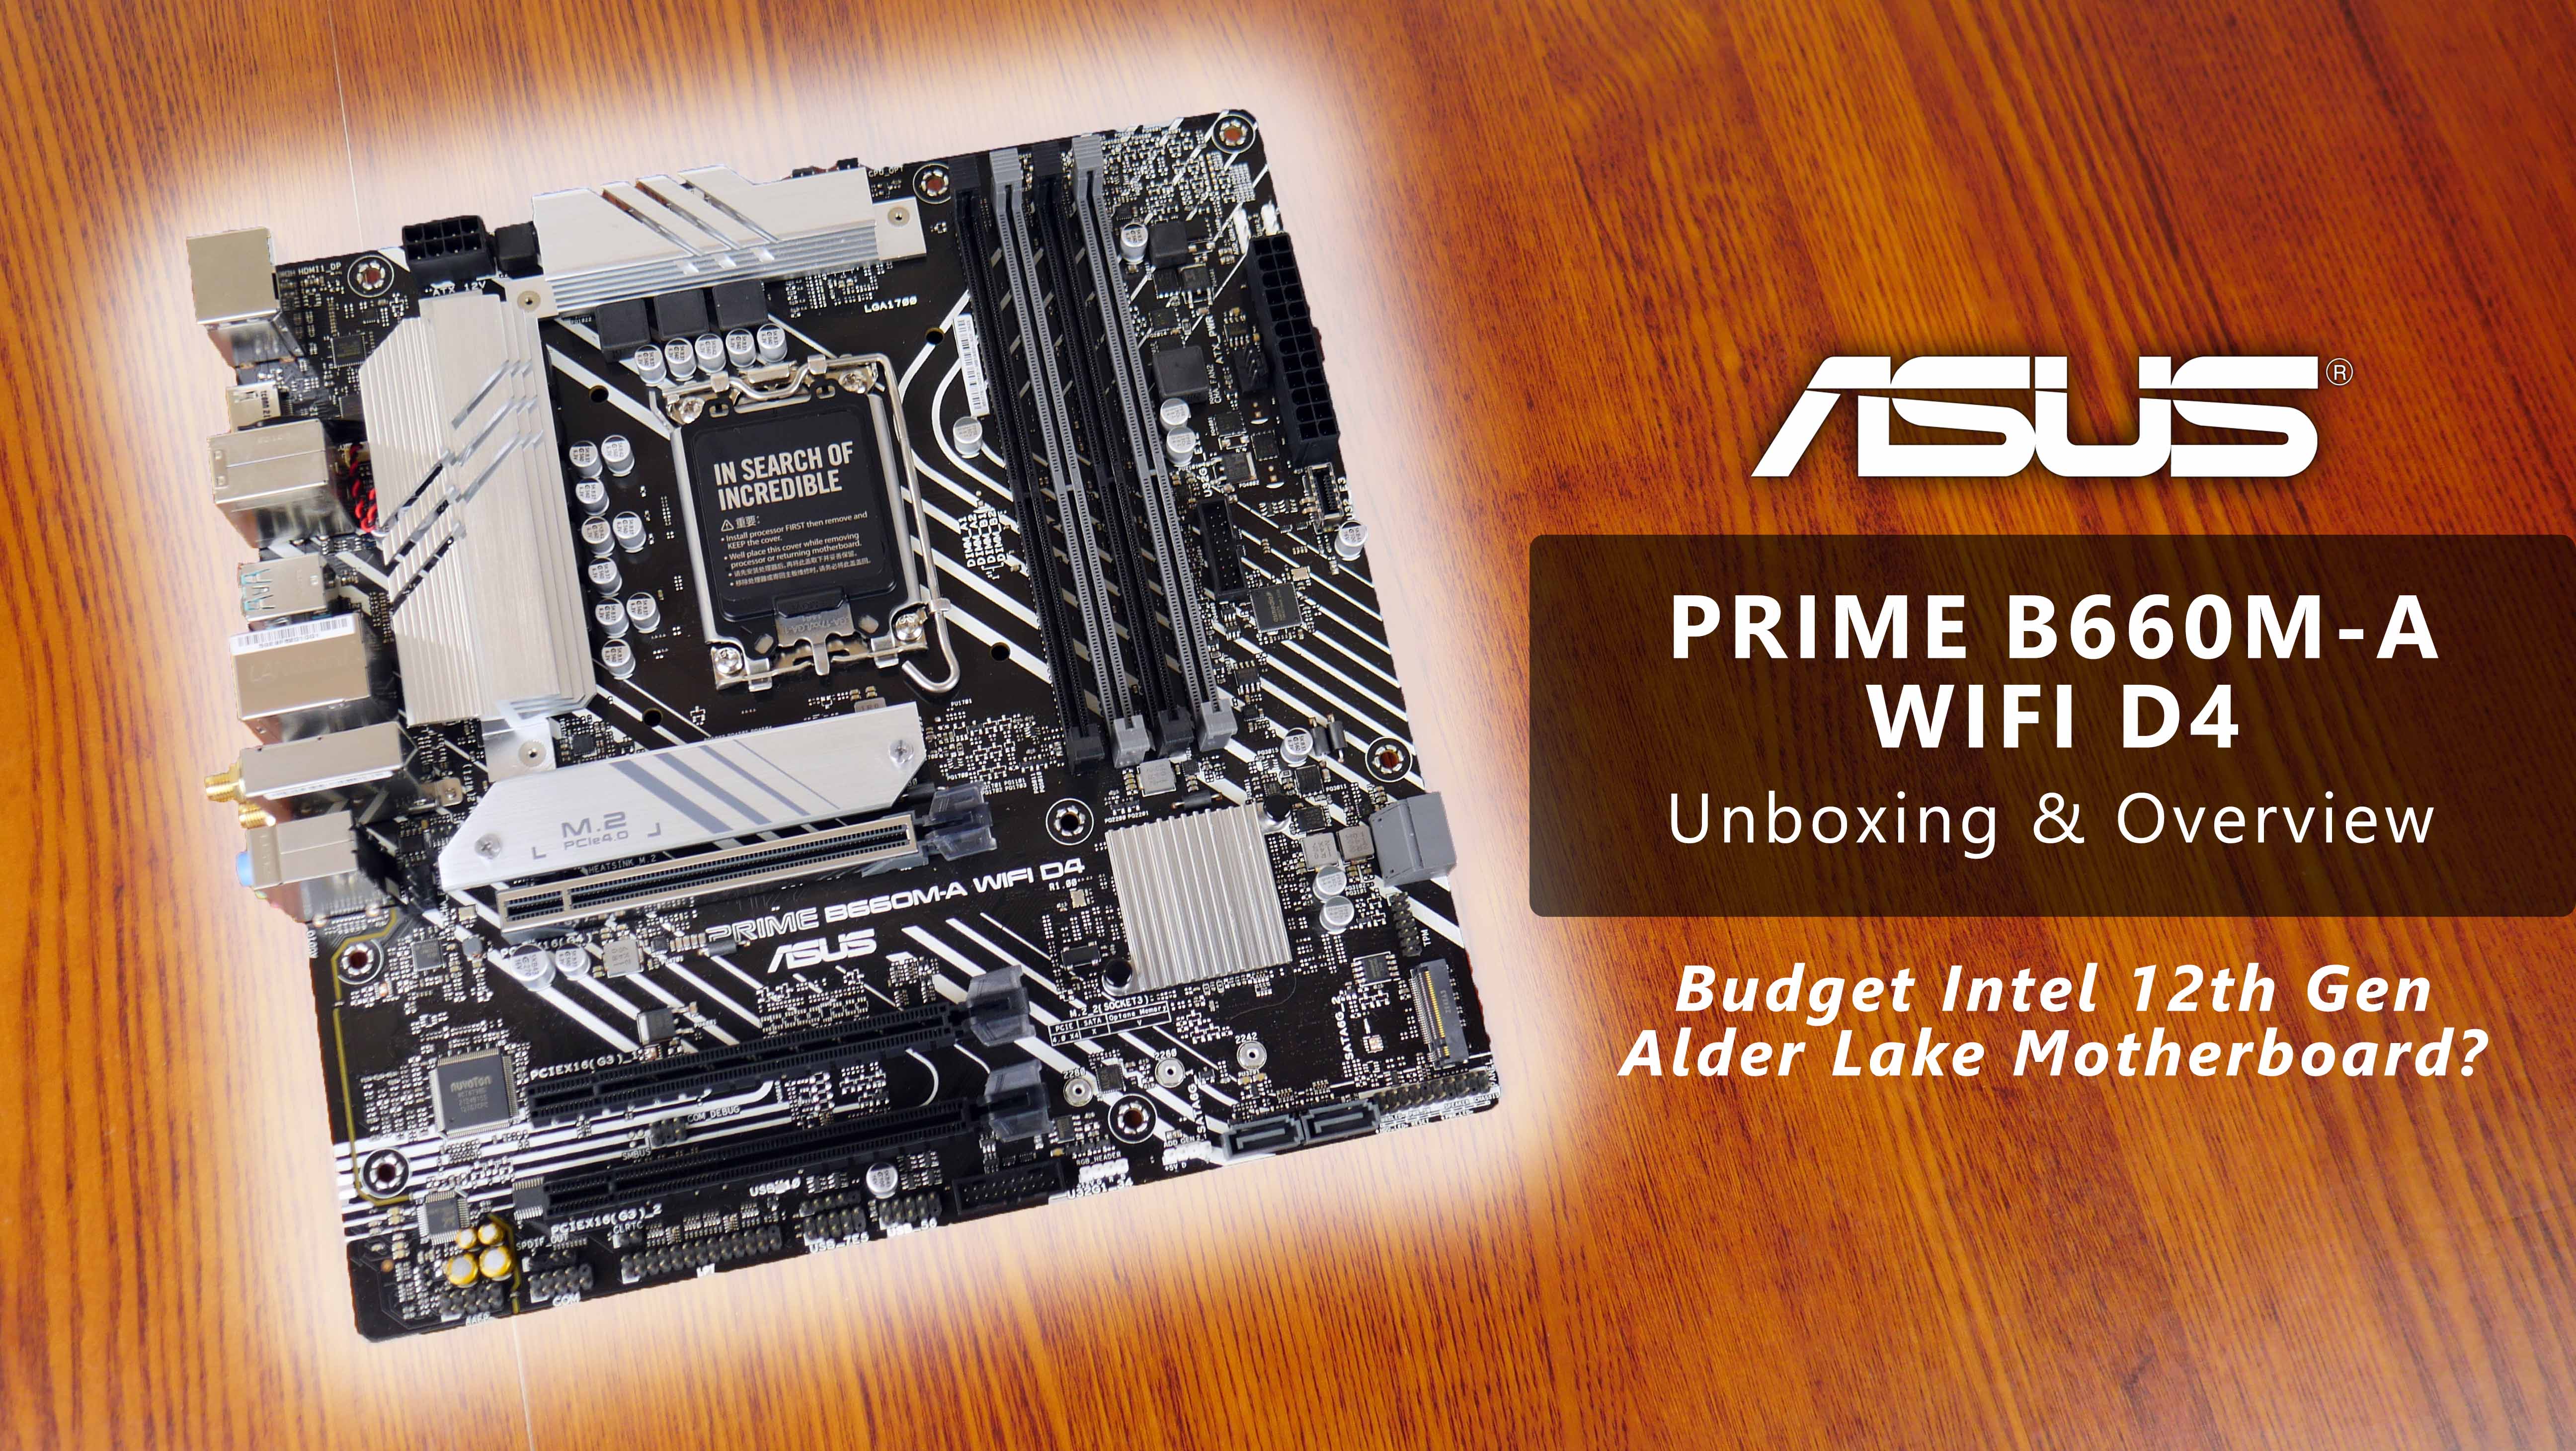 ASUS PRIME B660M-A WIFI D4 Motherboard - Unboxing & Overview 